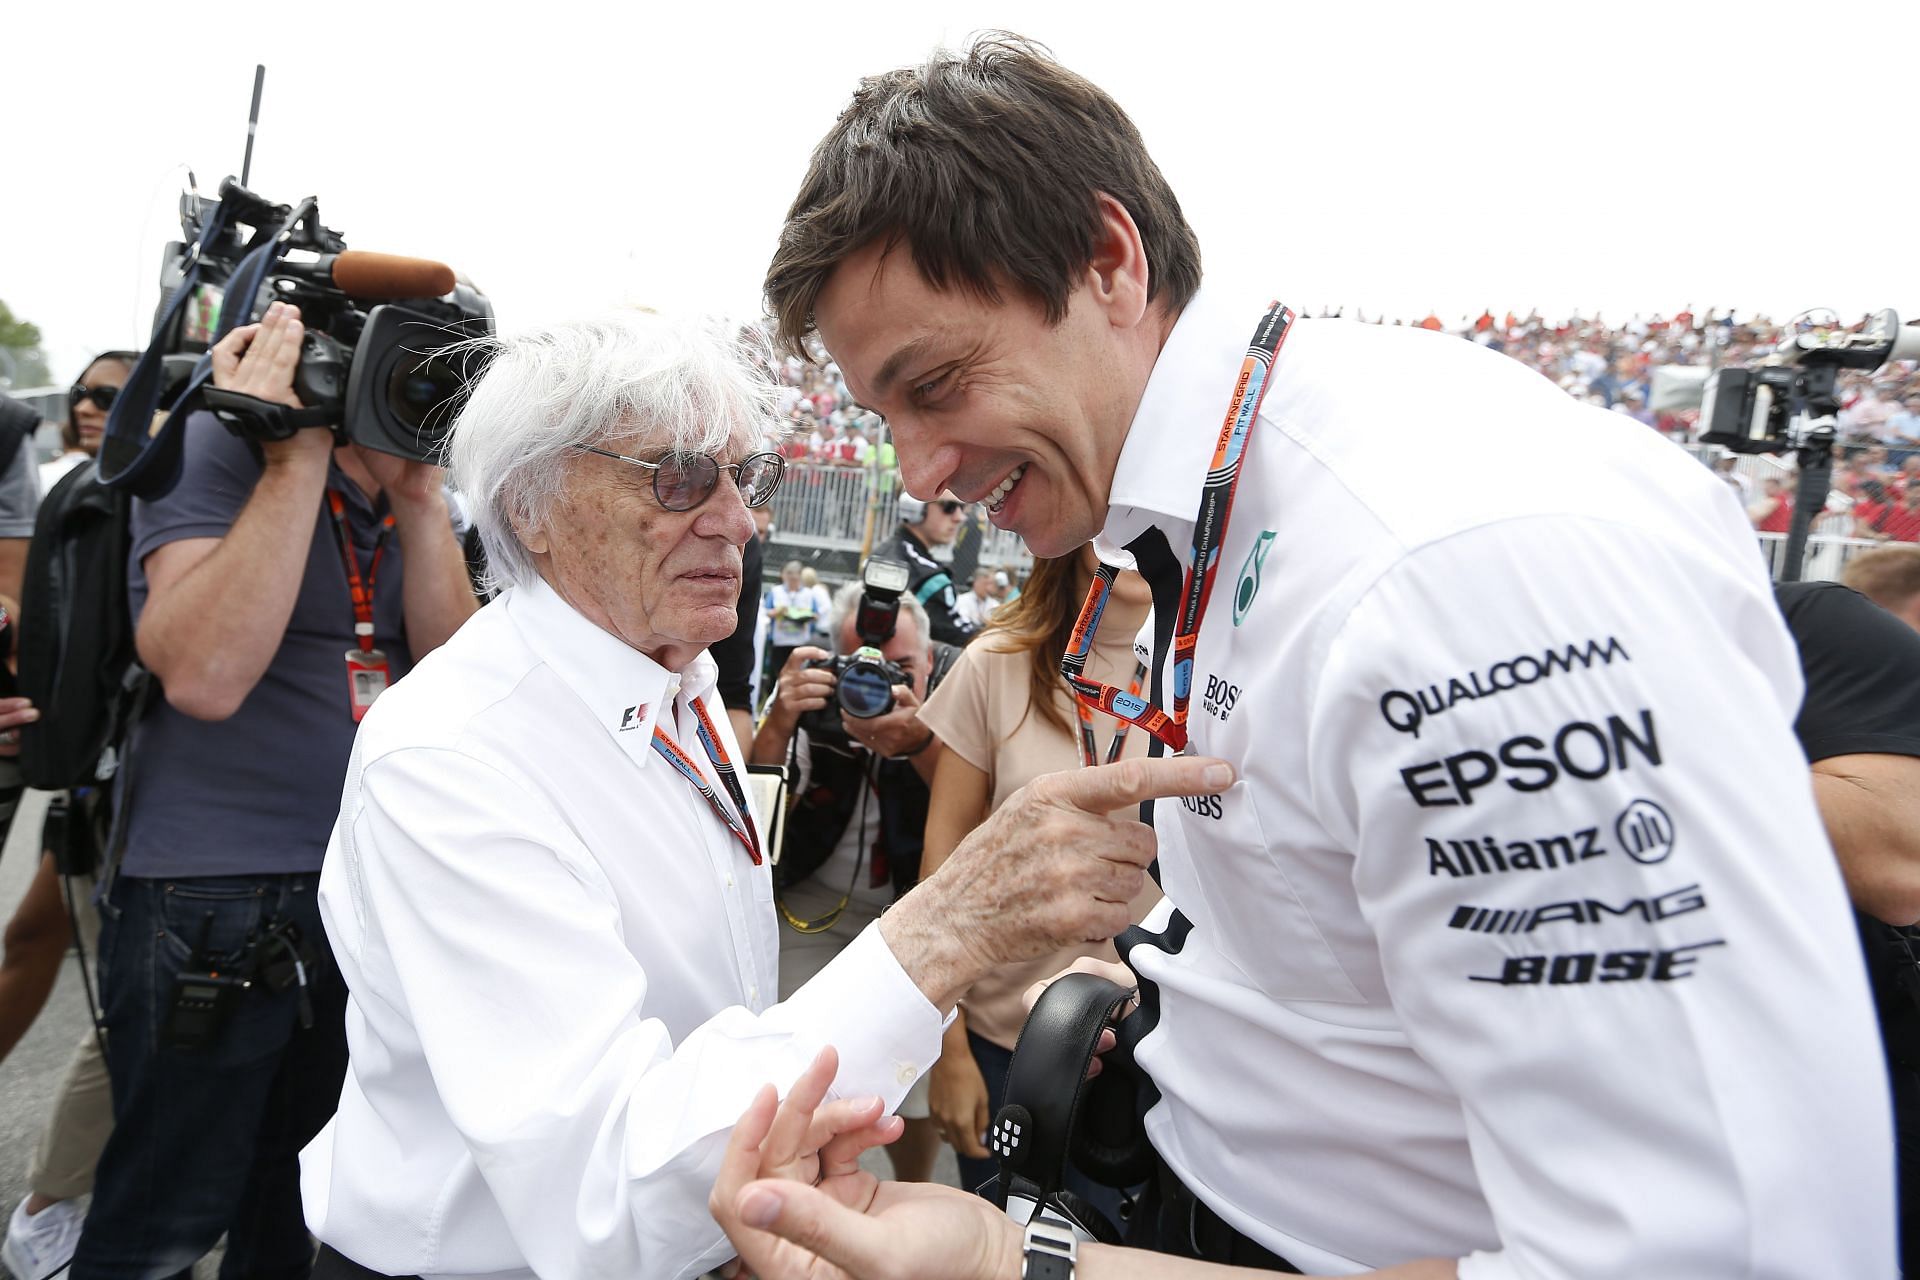 F1 supremo Bernie Ecclestone speaks with Mercedes GP Executive Director Toto Wolff during the Canadian Formula One Grand Prix. (Photo by Charles Coates/Getty Images)